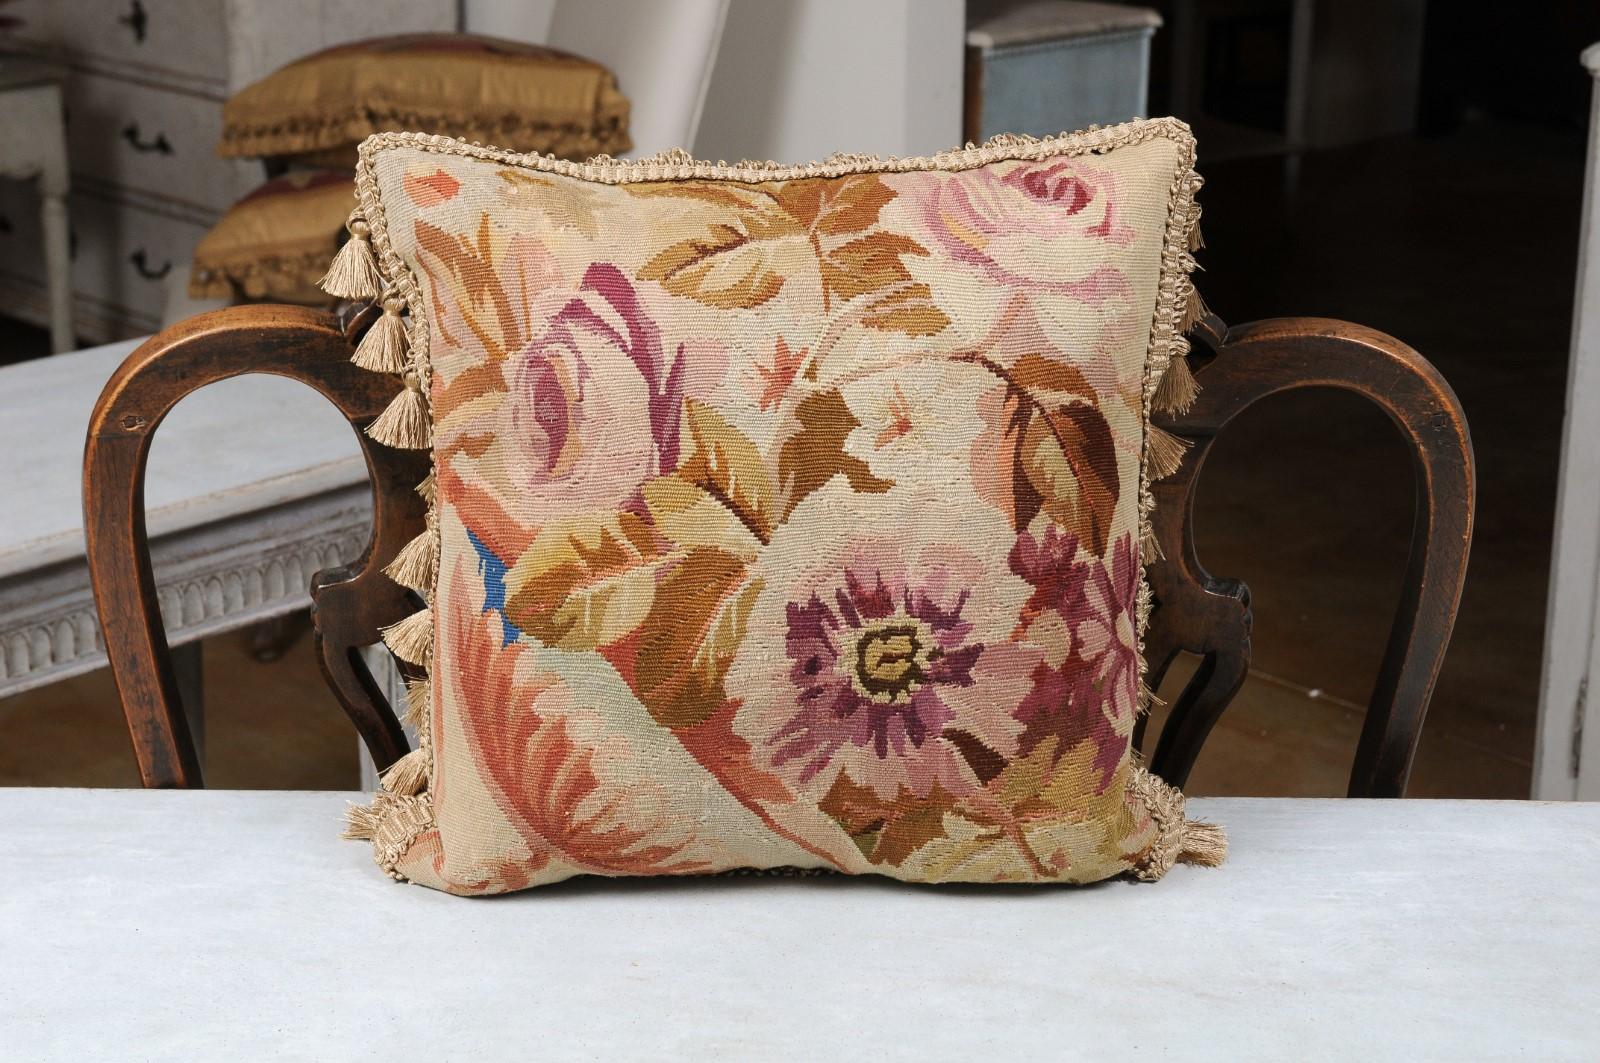 A French Aubusson tapestry pillow from the 19th century, with floral decor and petite tassels. Created during the 19th century in the Aubusson tapestry manufacture located in central France, this pillow features eye-catching pink and purple roses